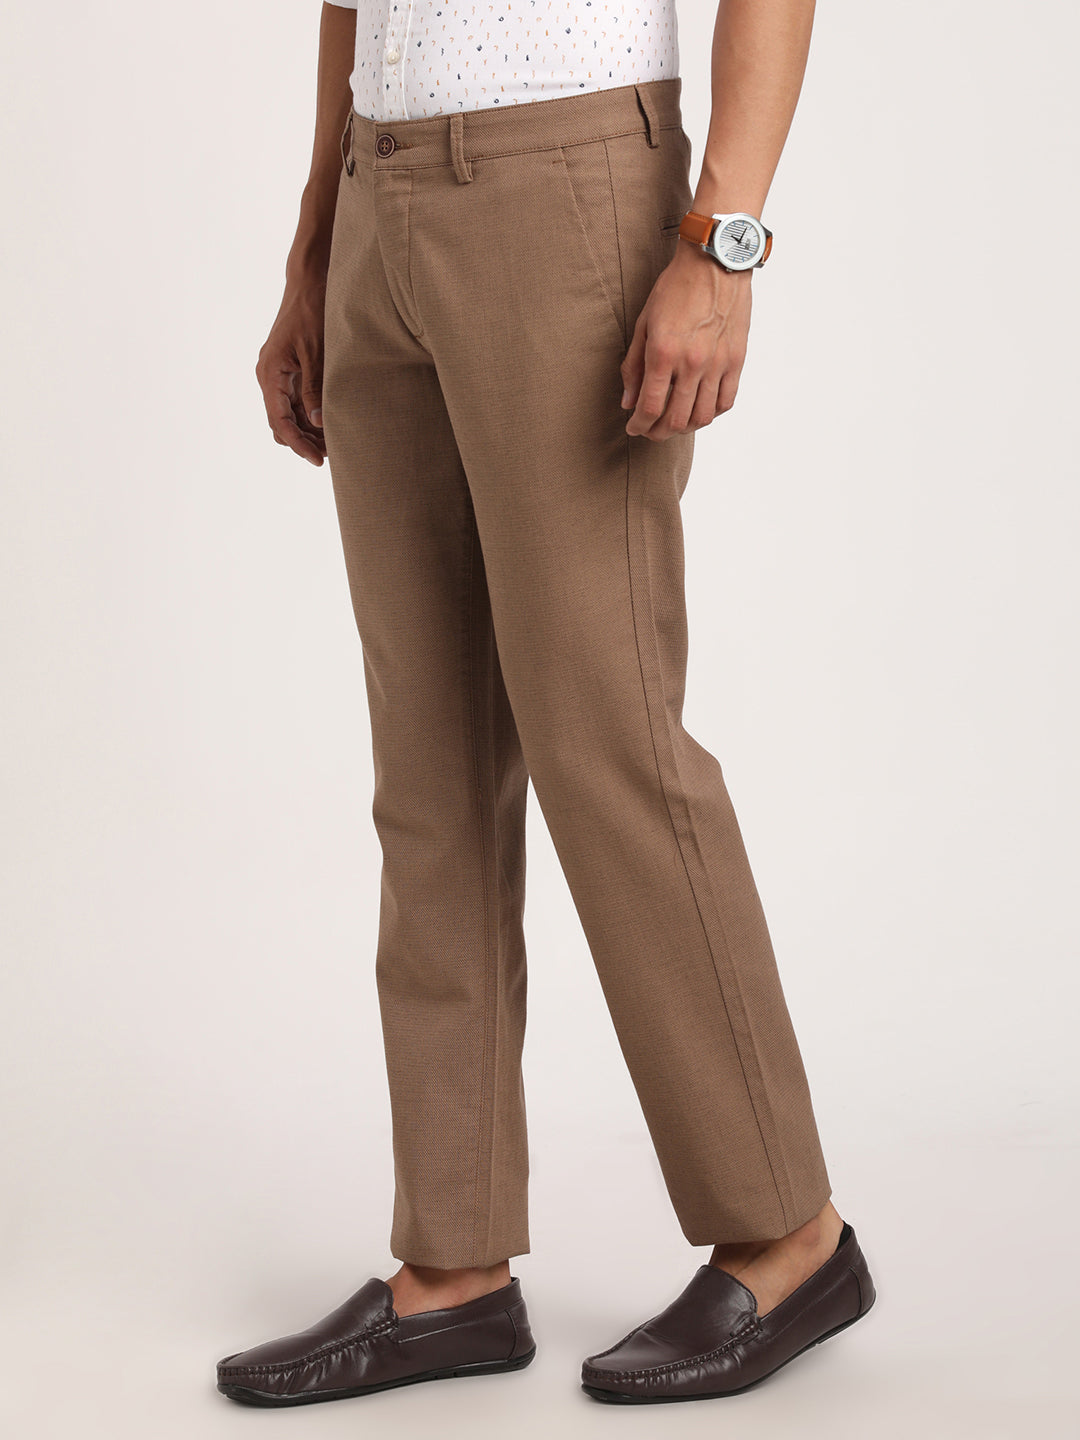 Beige Chino | Tapered Cotton Stretch Trouser - ASKET